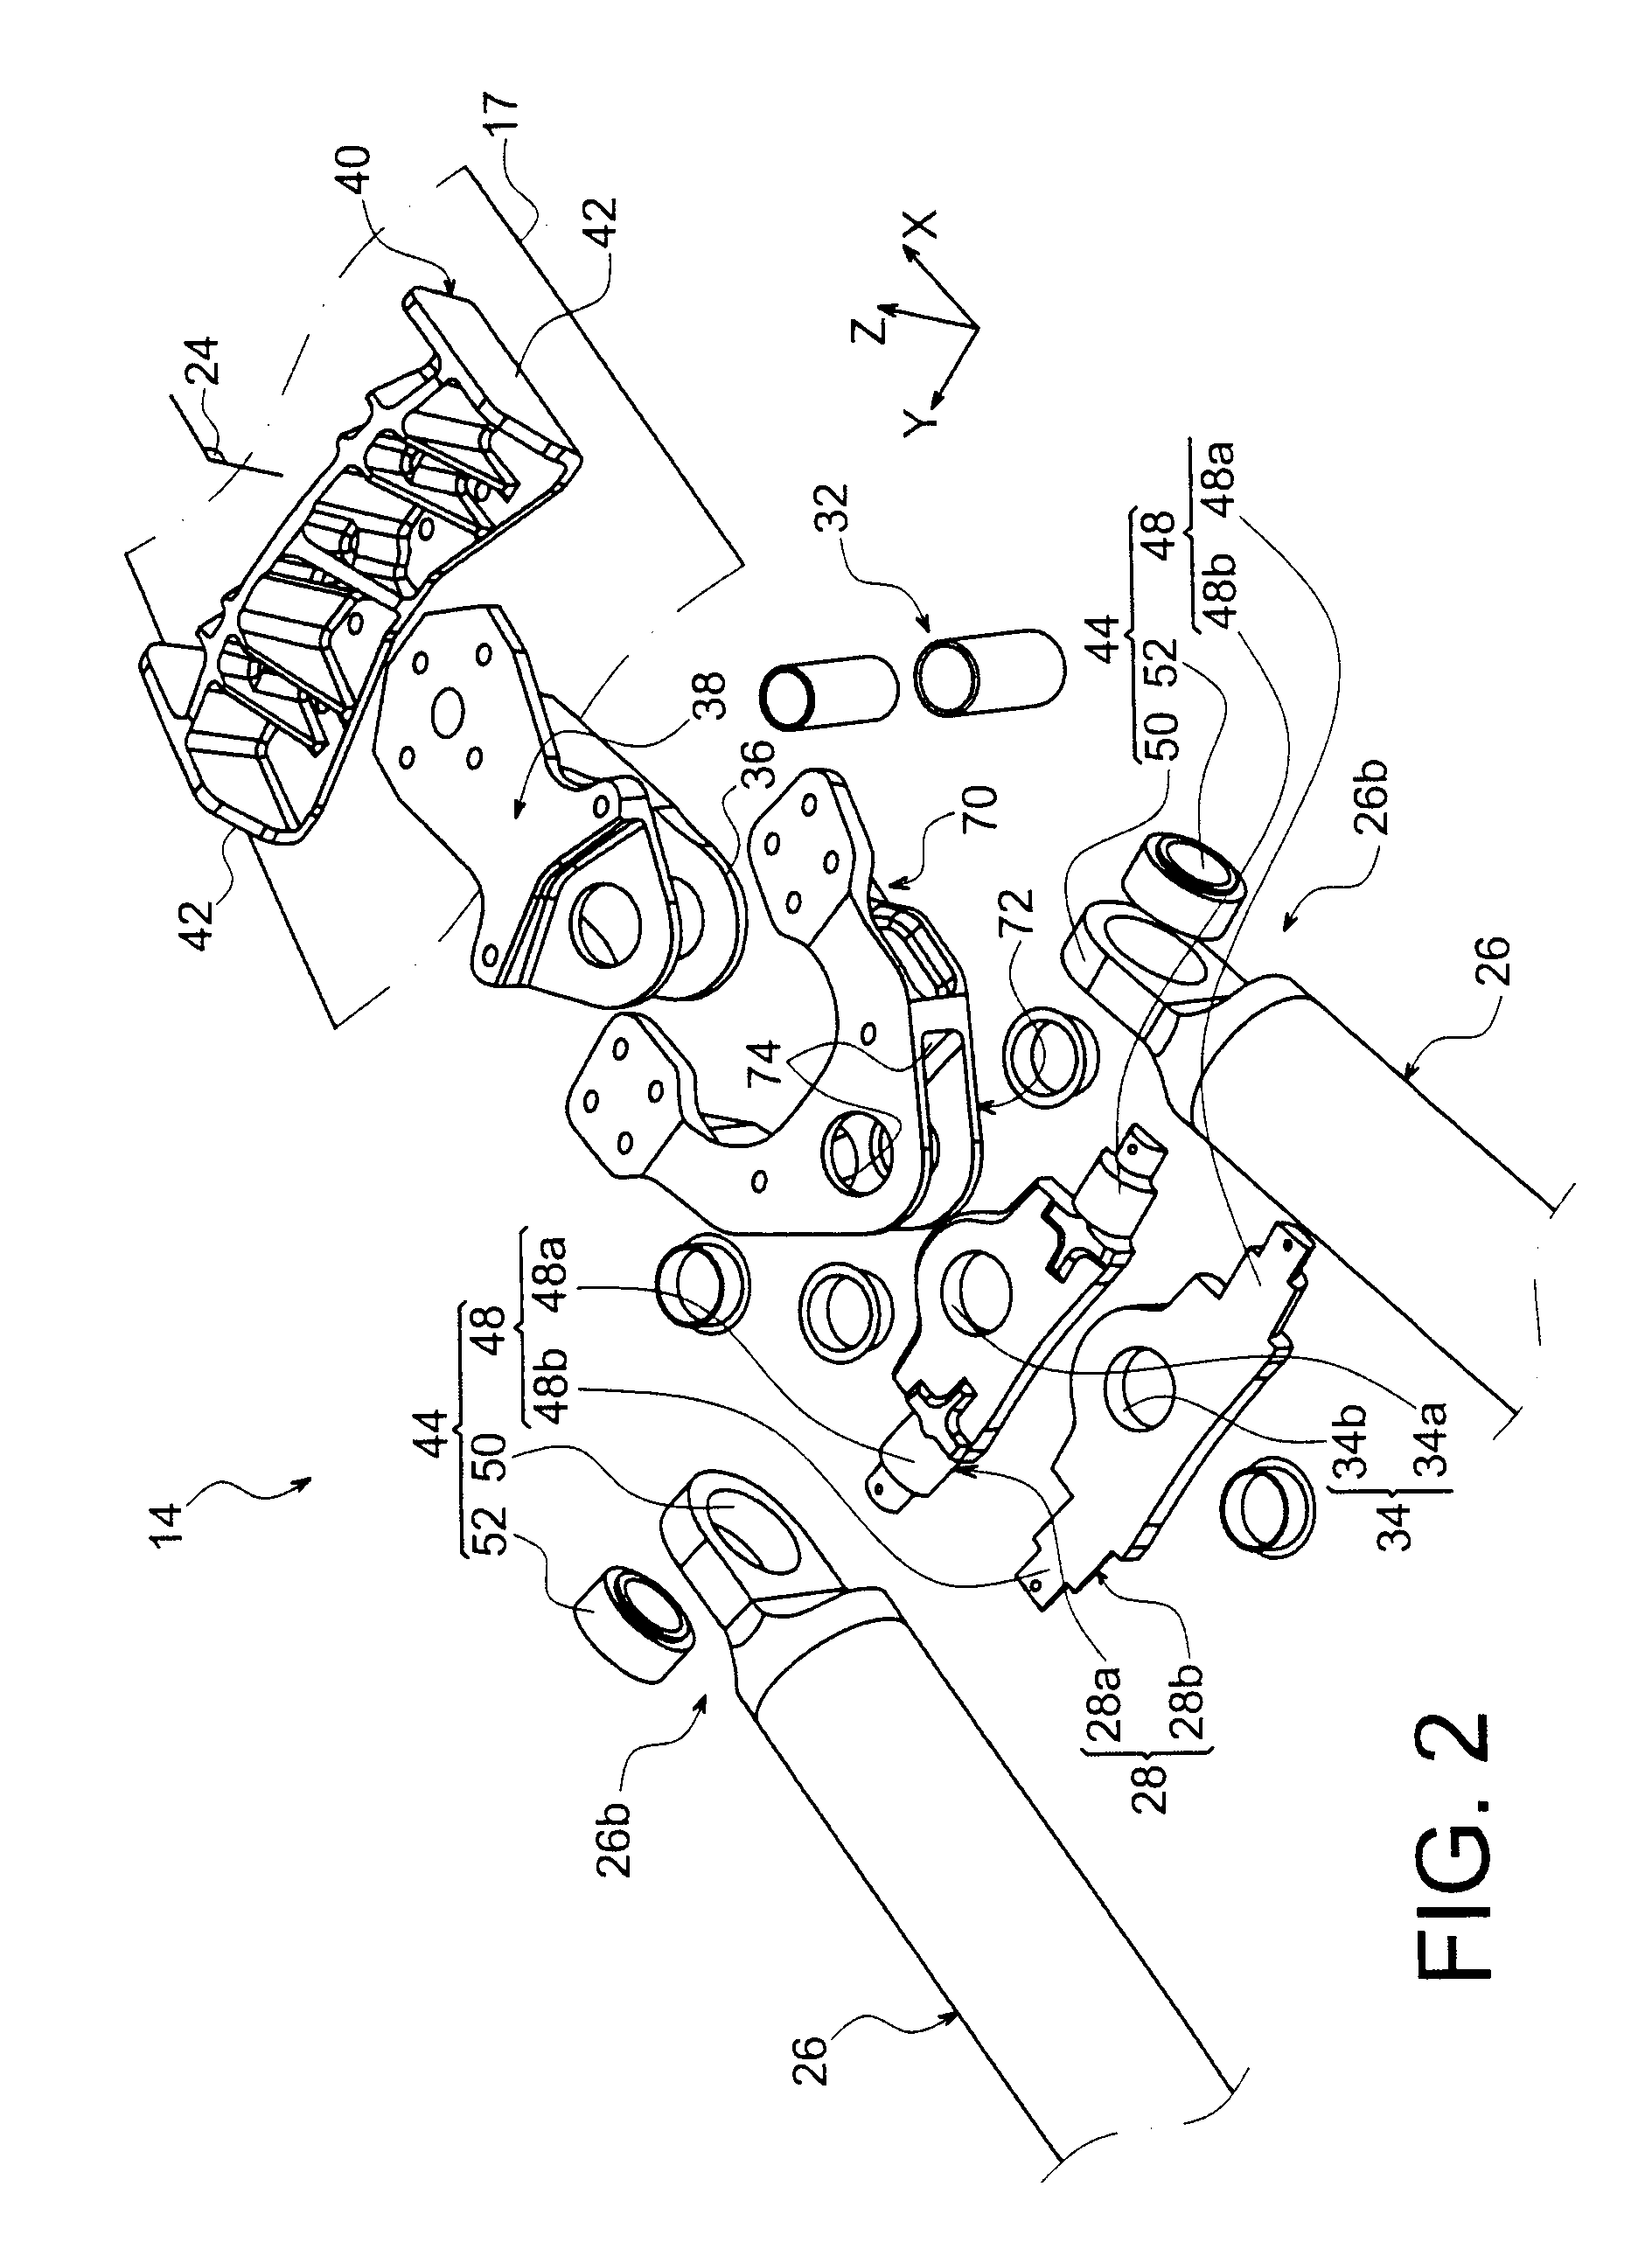 Aircraft engine attachment device comprising two thrust-reaching link rods that fit together transversely